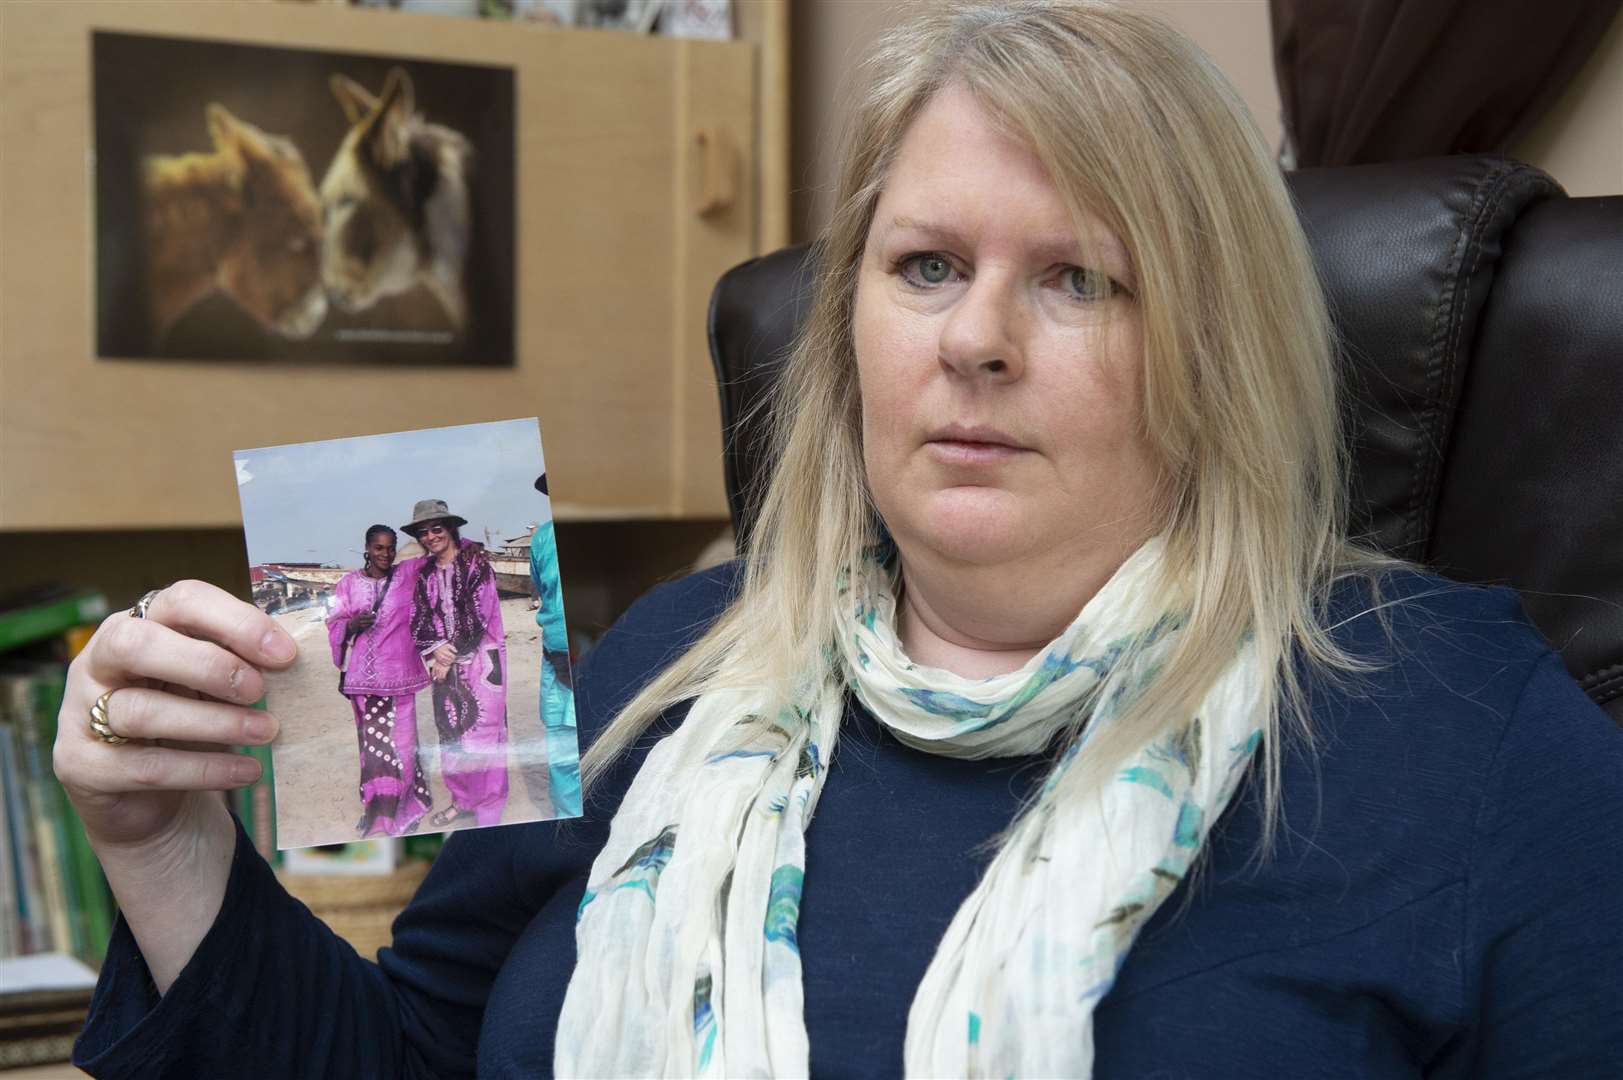 Elaine Kenley, of Coombe Road, Maidstone, with a picture of Jack and his Gambian wife Fatou, is asking Boris Johnson to intervene in her fight for justice after her brother Jack was murdered in The Gambia. Picture: Andy Payton